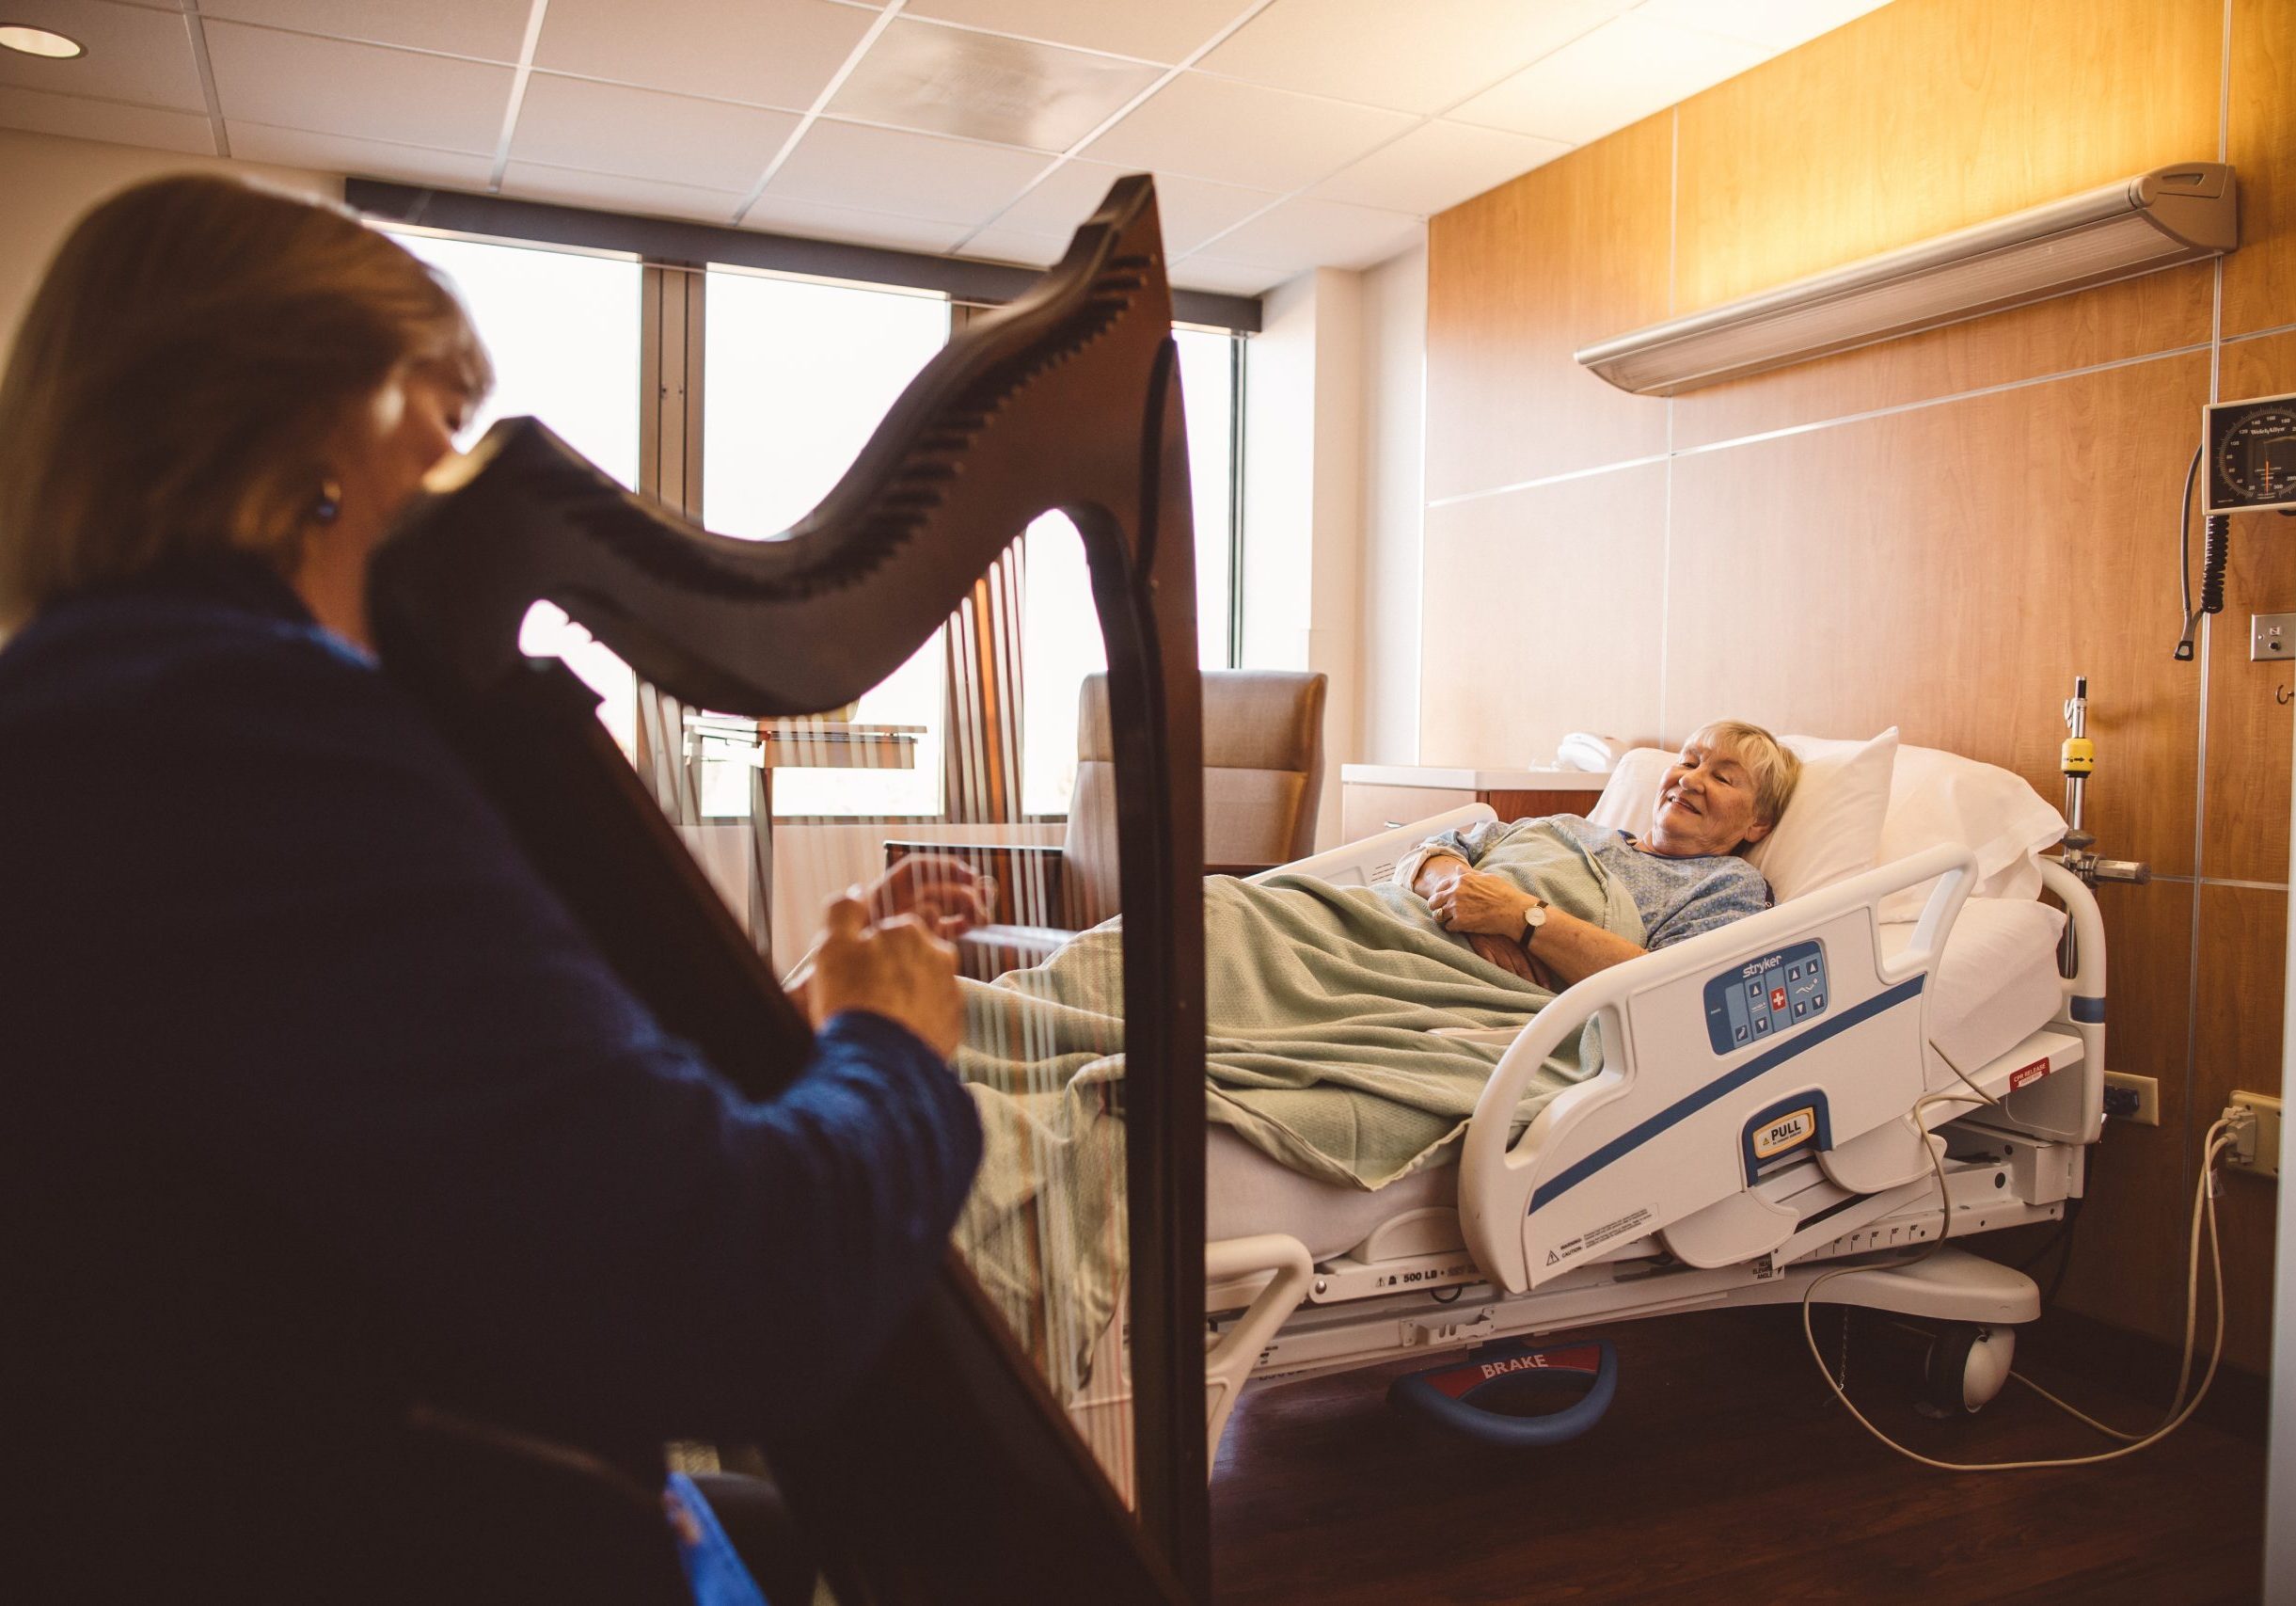 Denver Harpist Barbara Playing Therapeutic Music for Patient